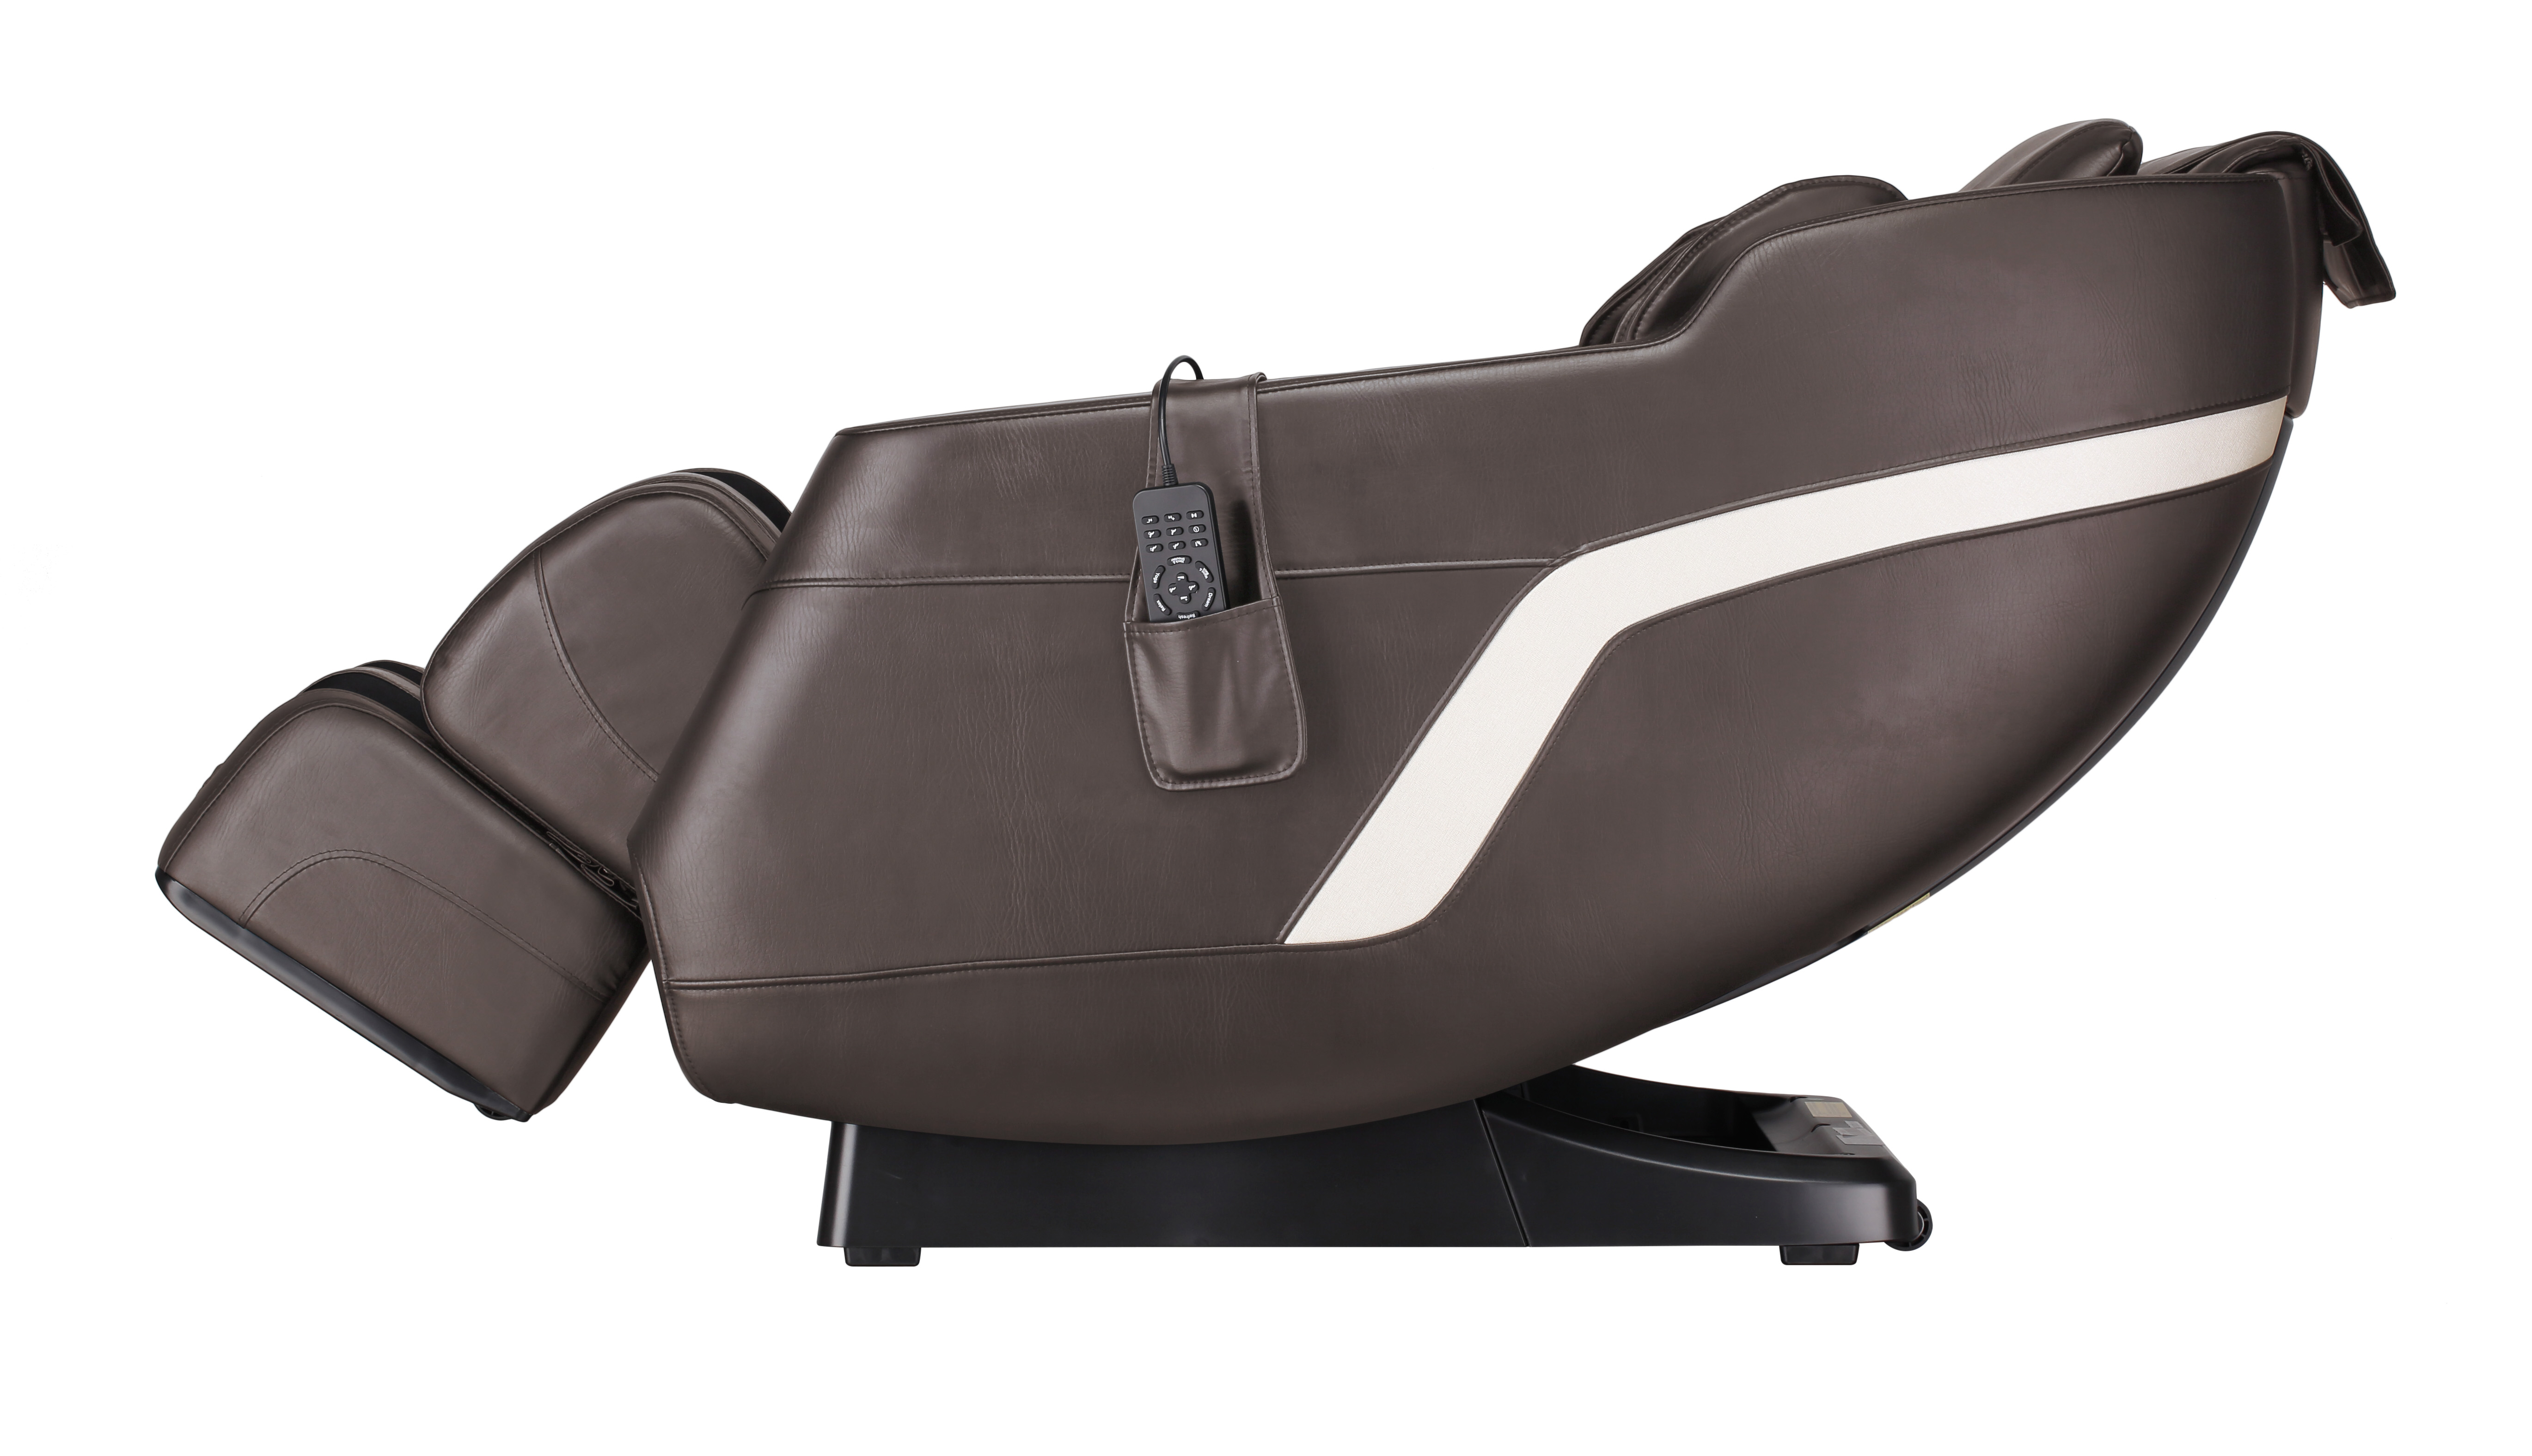 BOSSCARE Assembled Massage Chair and Recliners Full Body Brown for Muscle Relaxation(41*23*32 in) - image 4 of 13